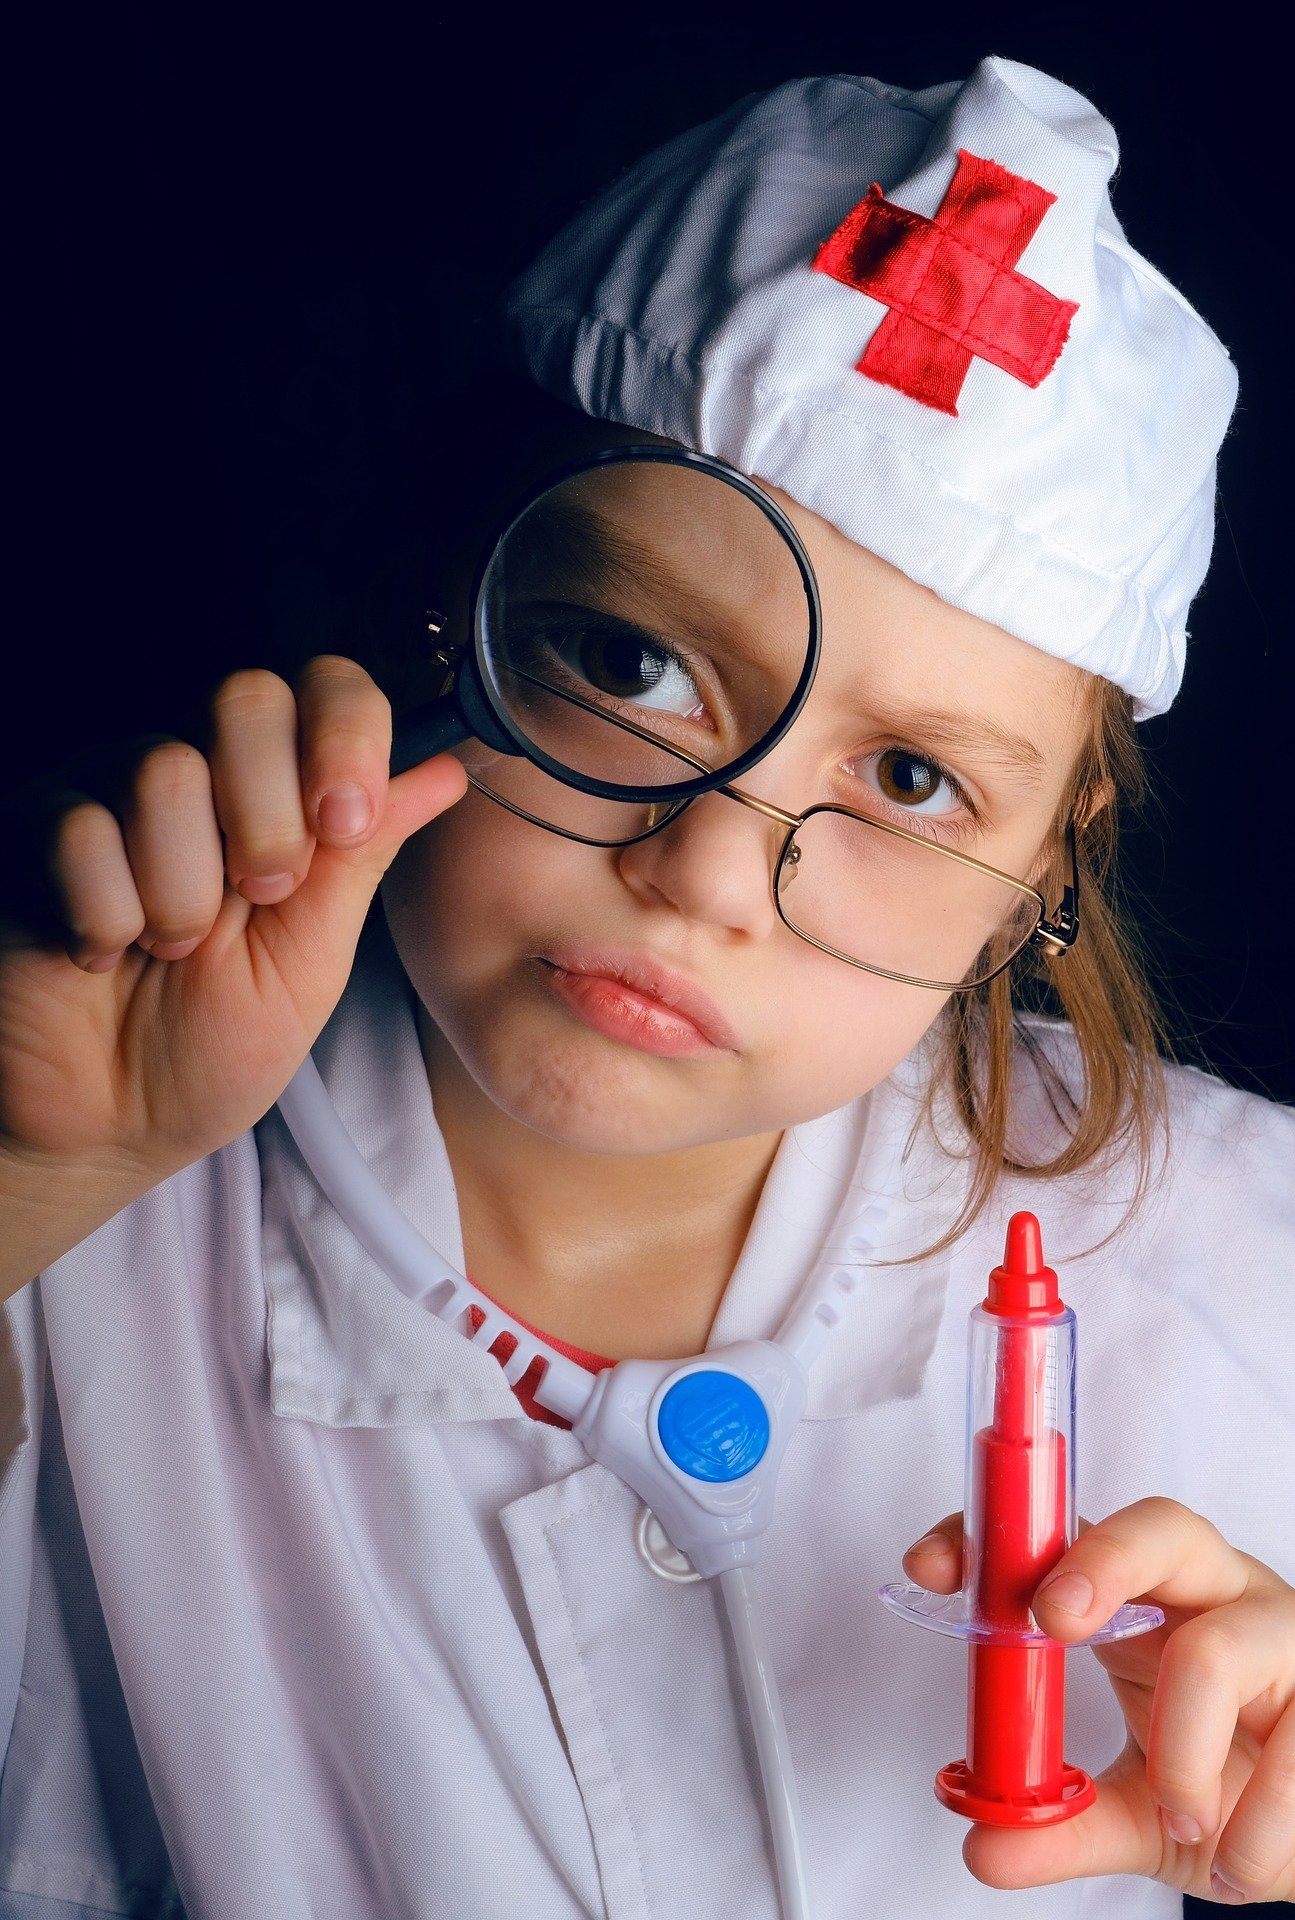 What does a Paediatric Nurse do?